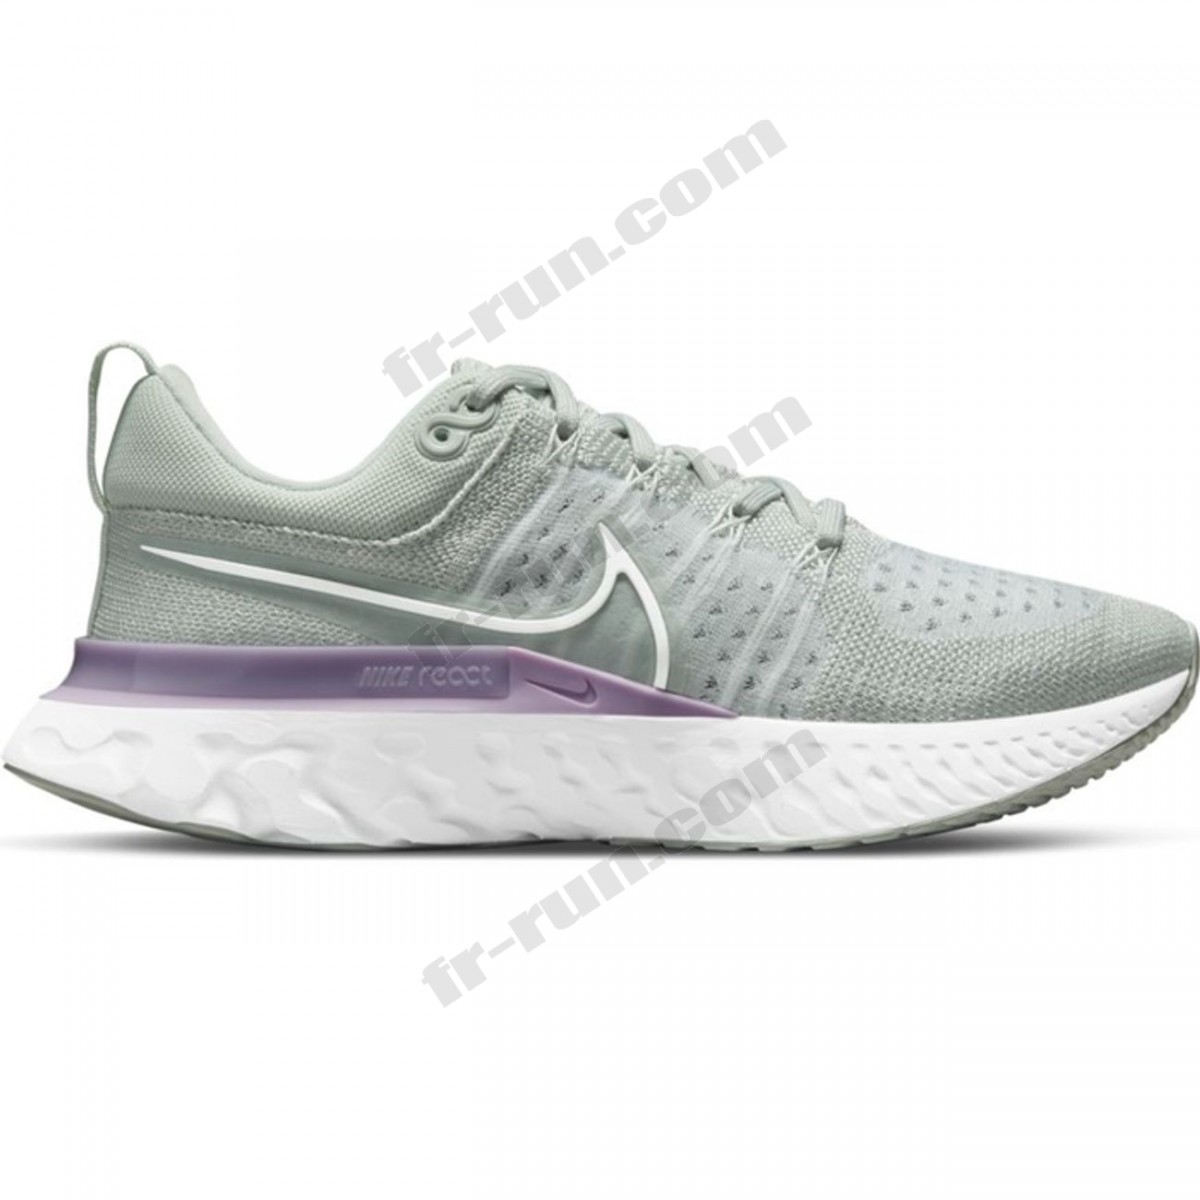 Nike/CHAUSSURES BASSES running femme NIKE W NIKE REACT INFINITY RUN FK 2 √ Nouveau style √ Soldes - Nike/CHAUSSURES BASSES running femme NIKE W NIKE REACT INFINITY RUN FK 2 √ Nouveau style √ Soldes